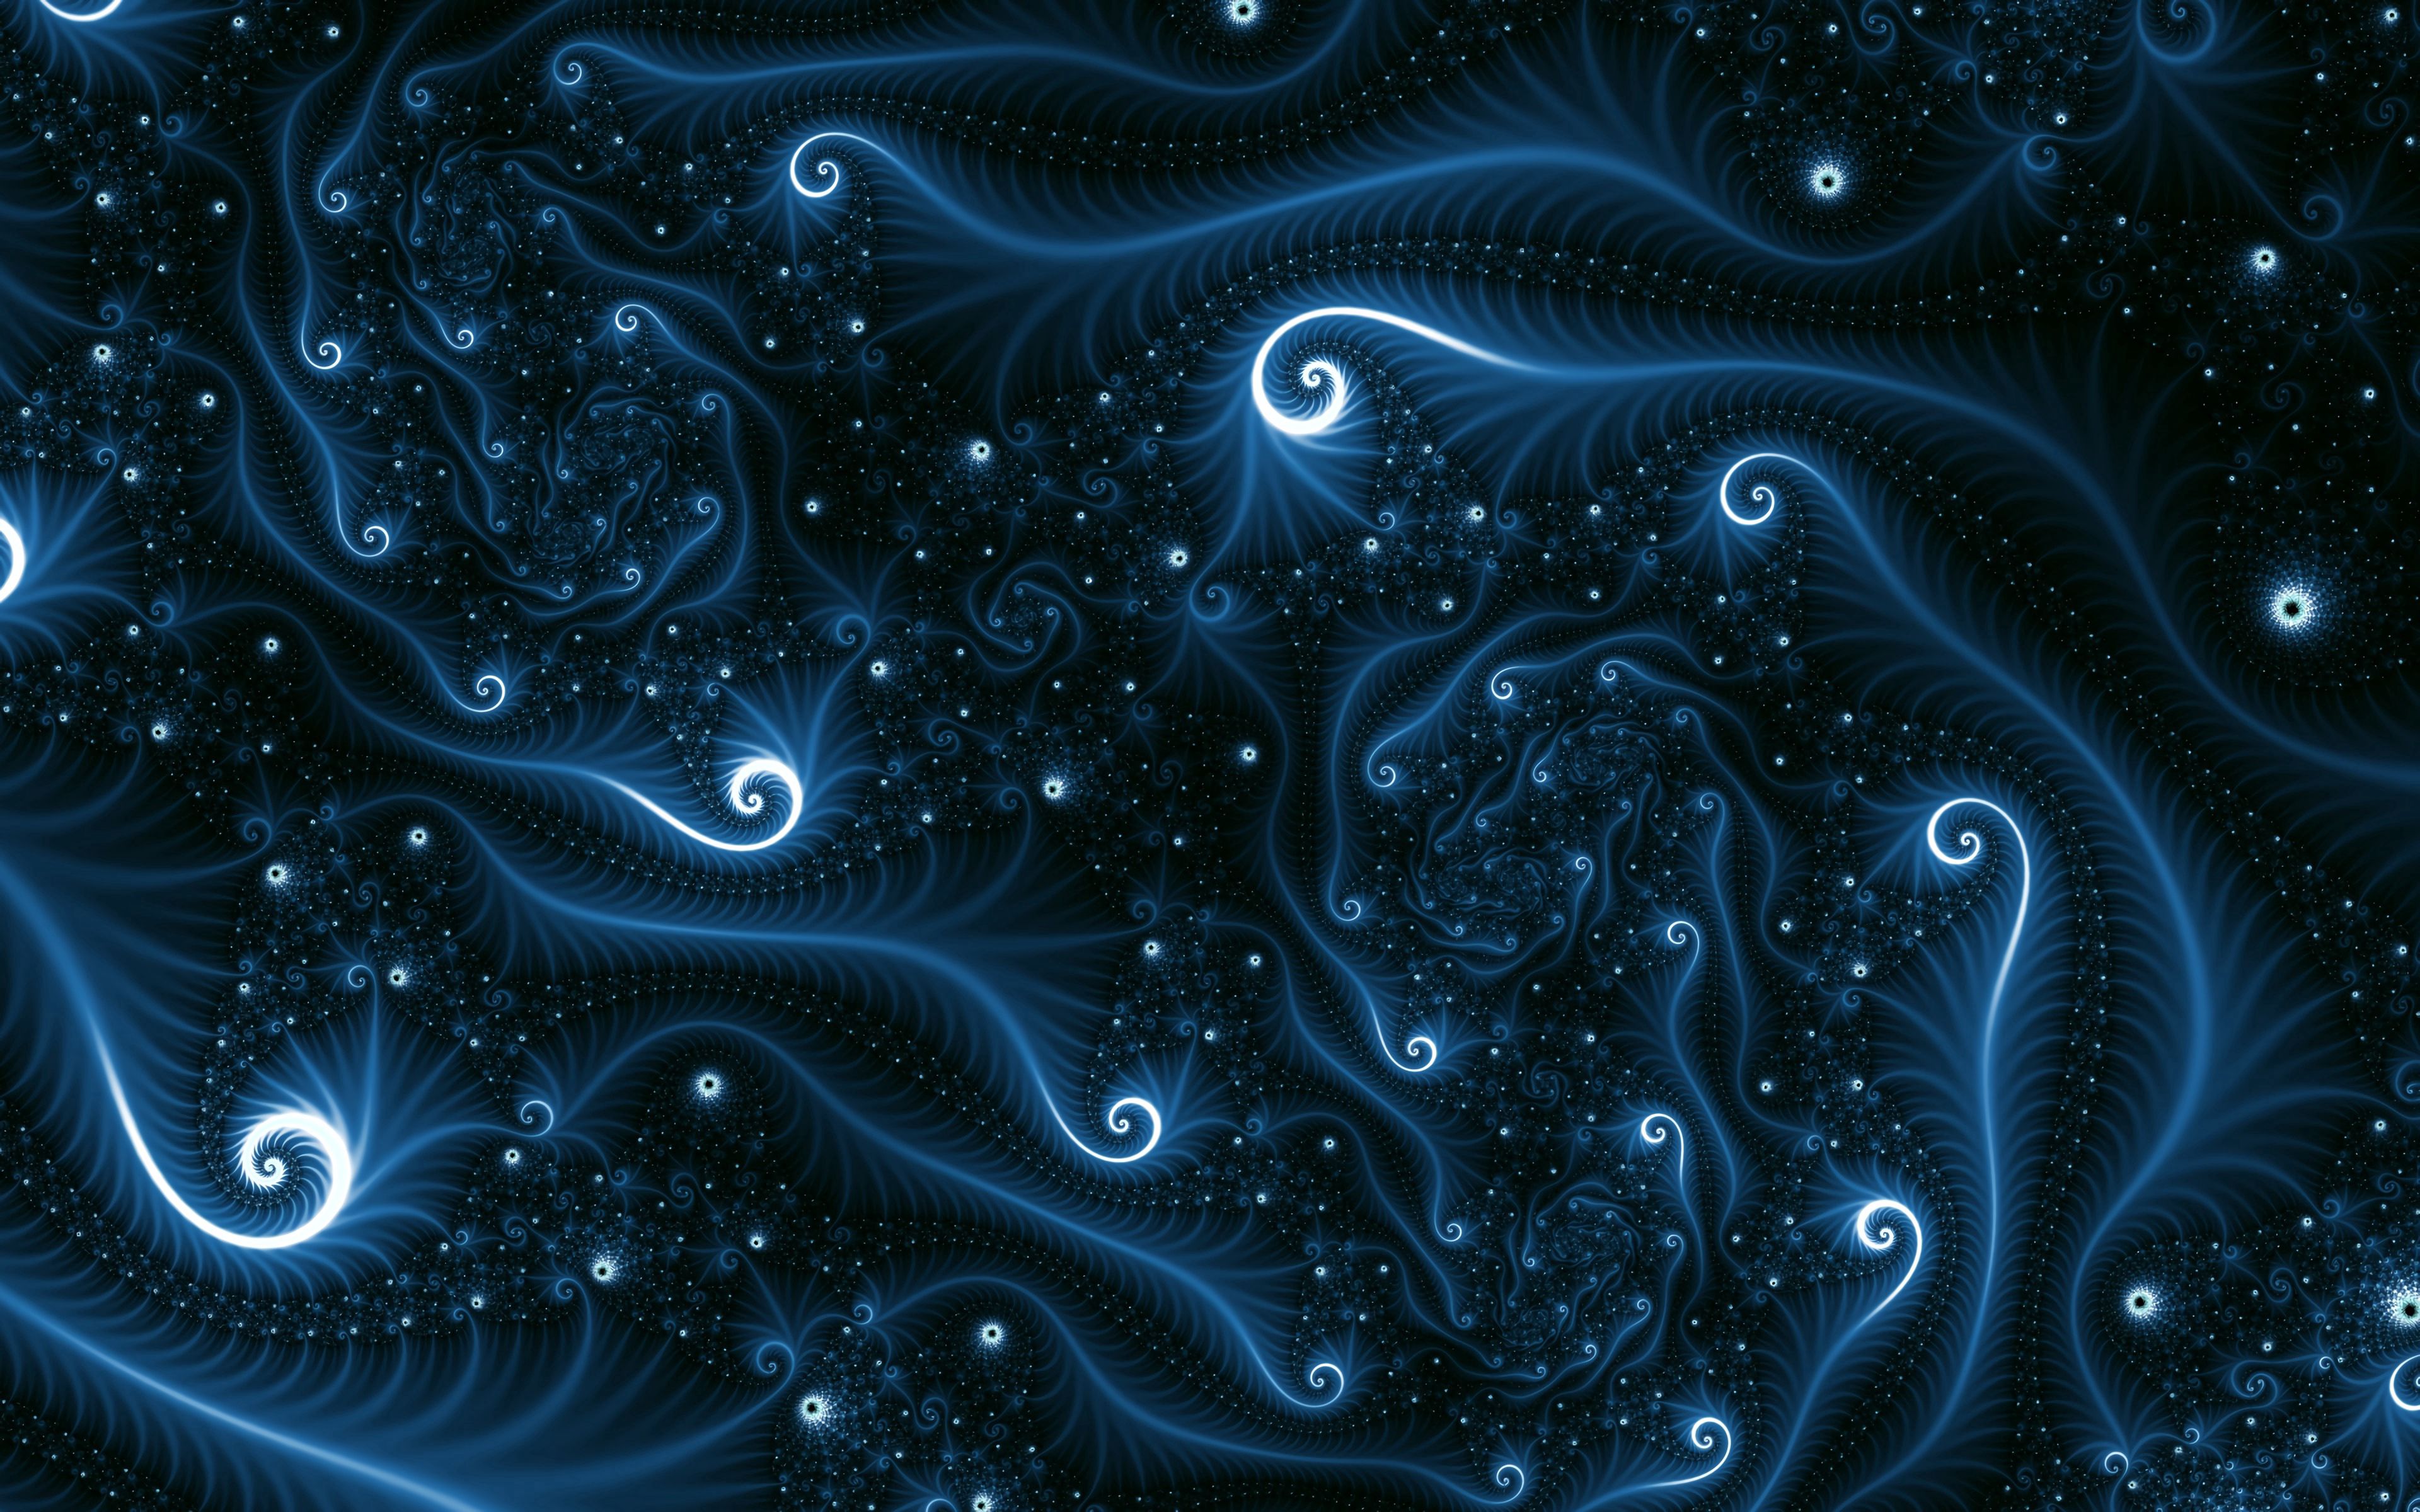 confused, intricate, abstract, fractal, glow, winding, sinuous, swirling, involute